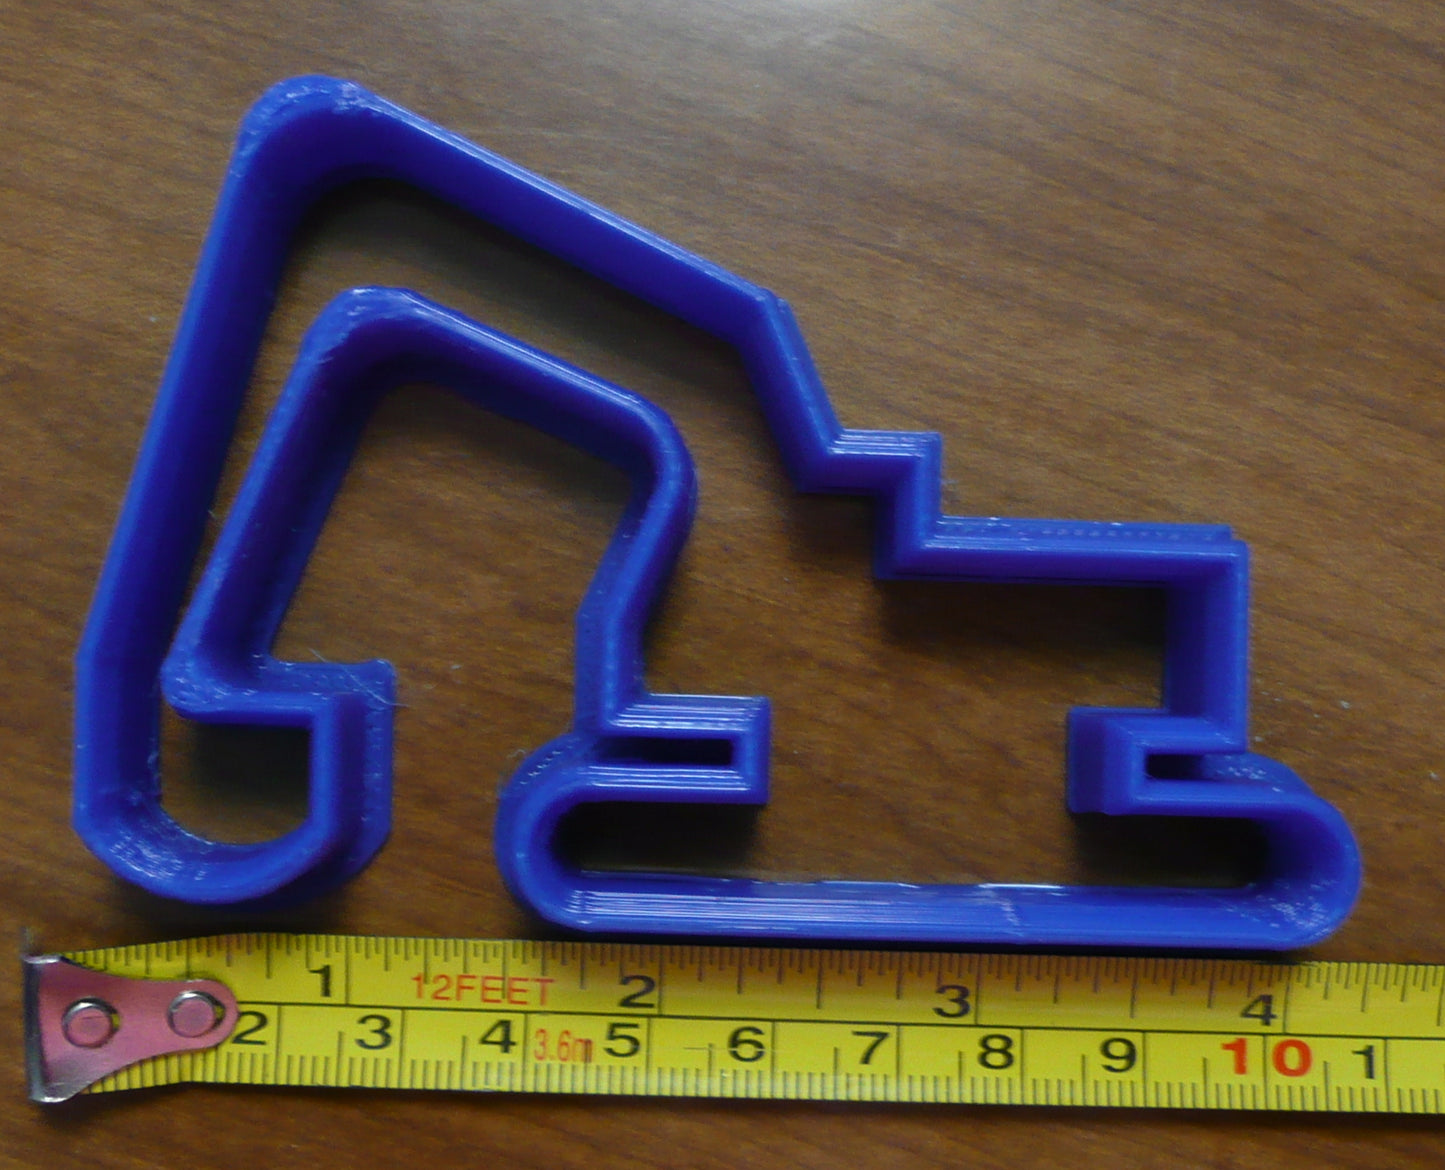 Excavator Digger Equipment Cookie Cutter Baking Tool Made In USA PR501